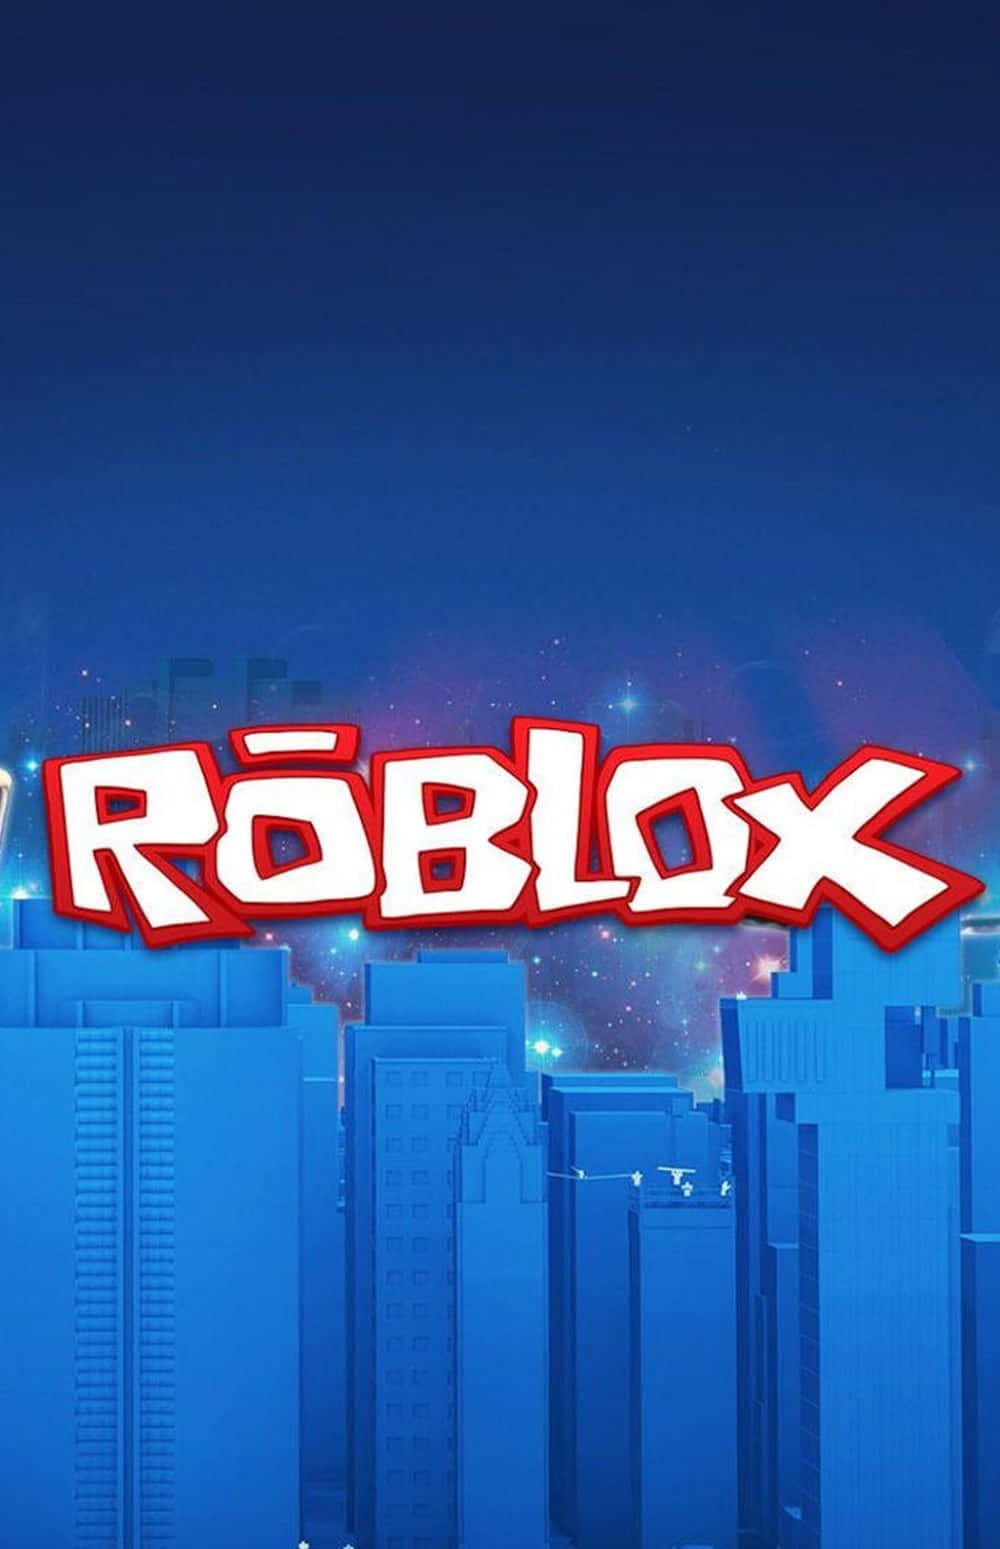 Engage with Roblox on your iPhone Wallpaper